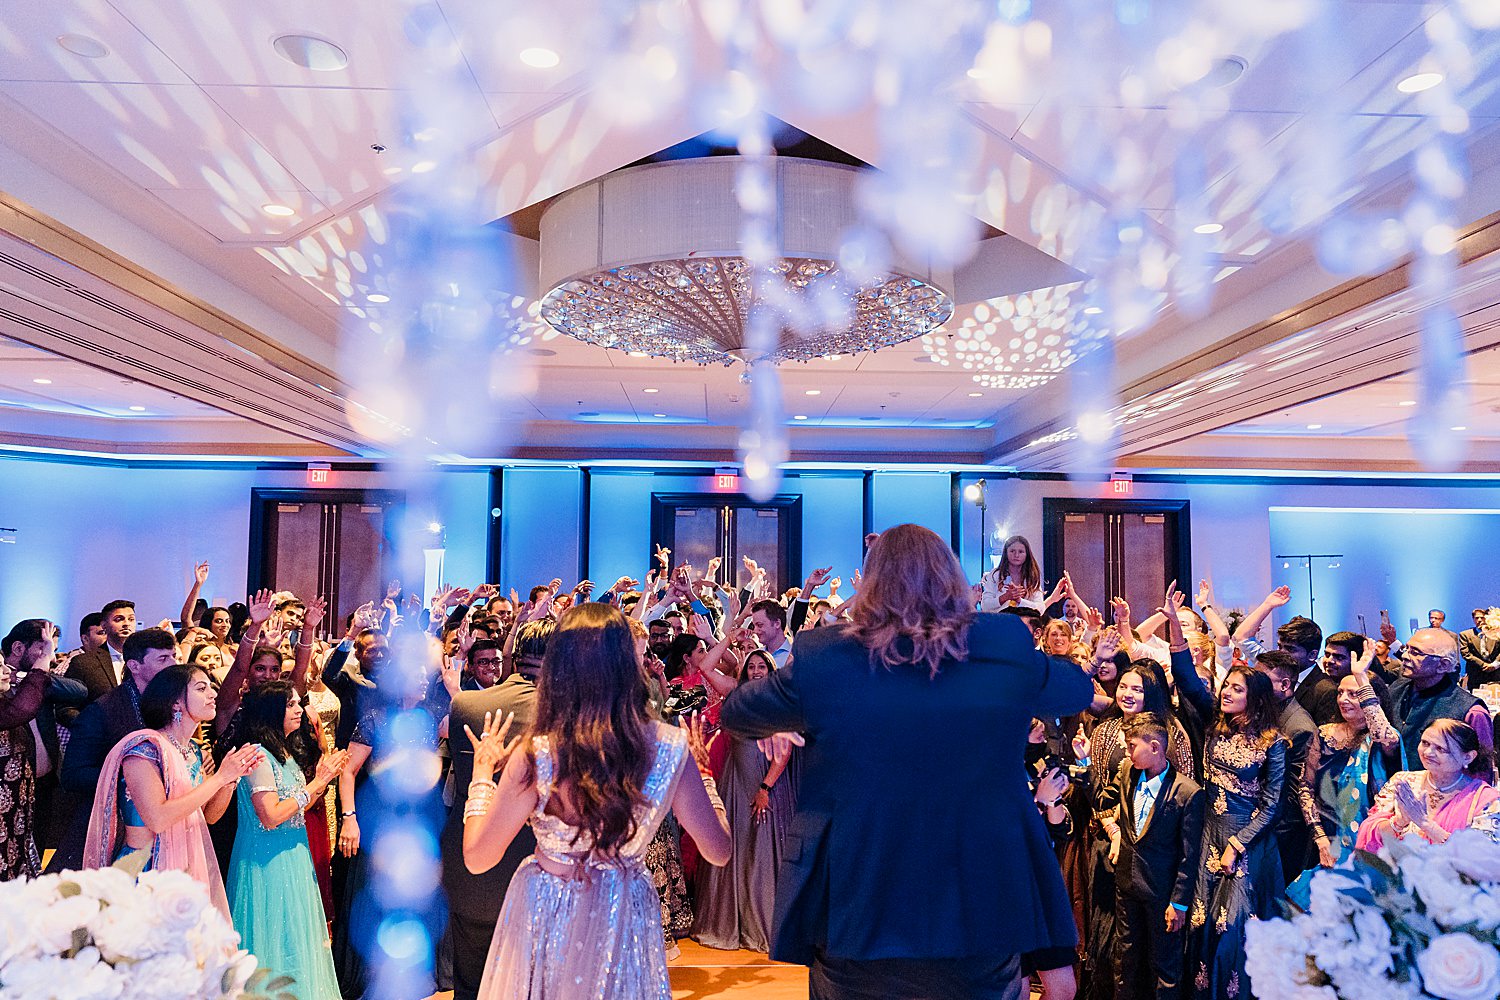 A wedding reception with people dancing in the middle of the room.